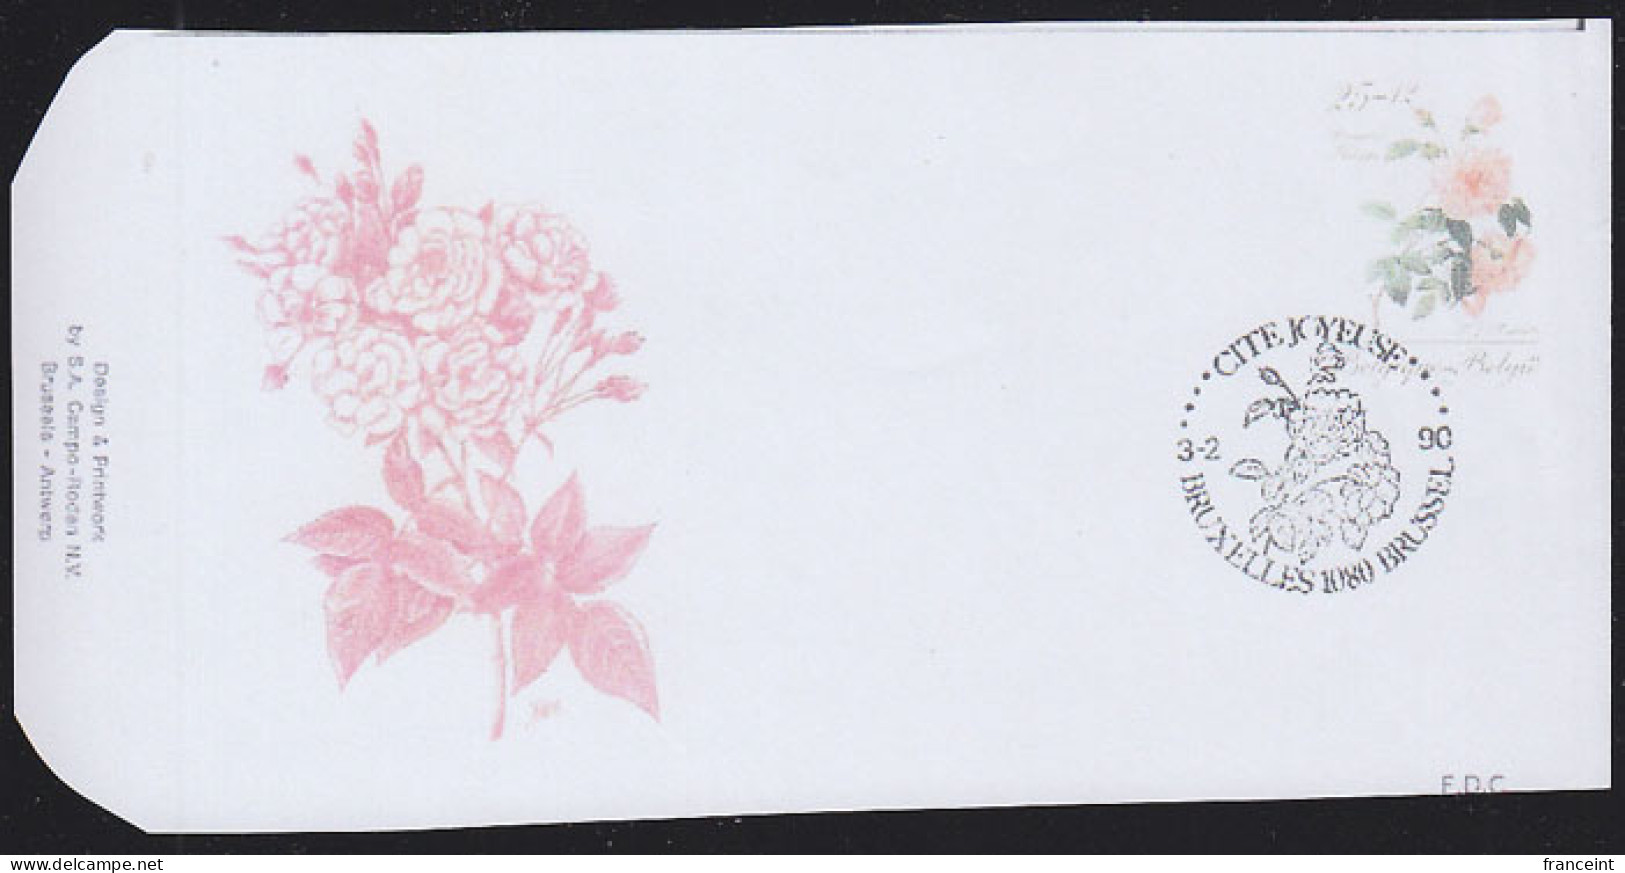 BELGIUM(1990) Bengale Philippe Rose. Die Proof In Red Signed By The Engraver, Representing The Cachet For FDC. Sc B1090 - Prove E Ristampe